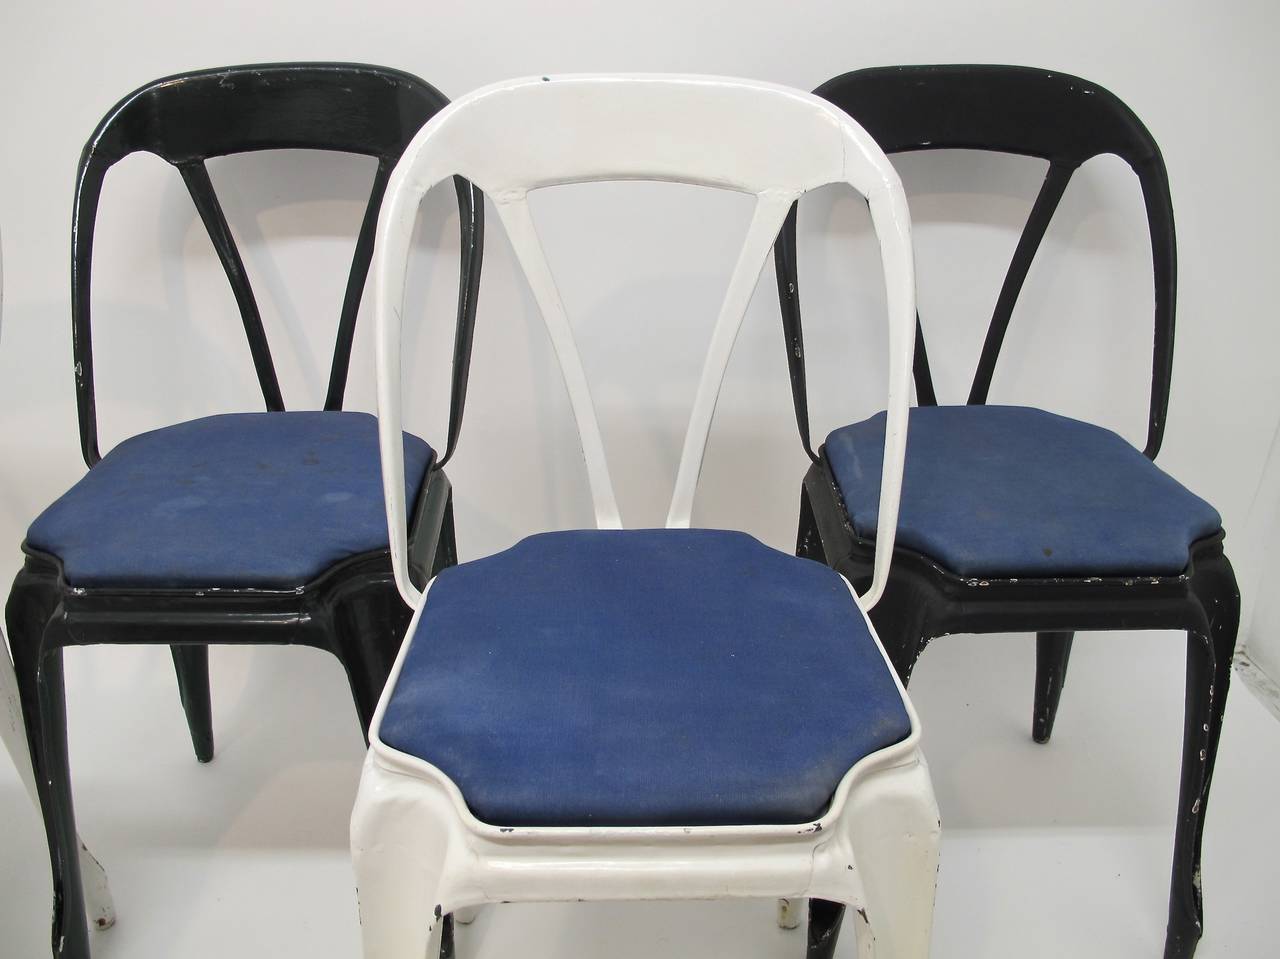 Art Nouveau style painted metal cafe chairs in original condition. One black, one dark green and two white chairs. Sold separately at $135.00 each.